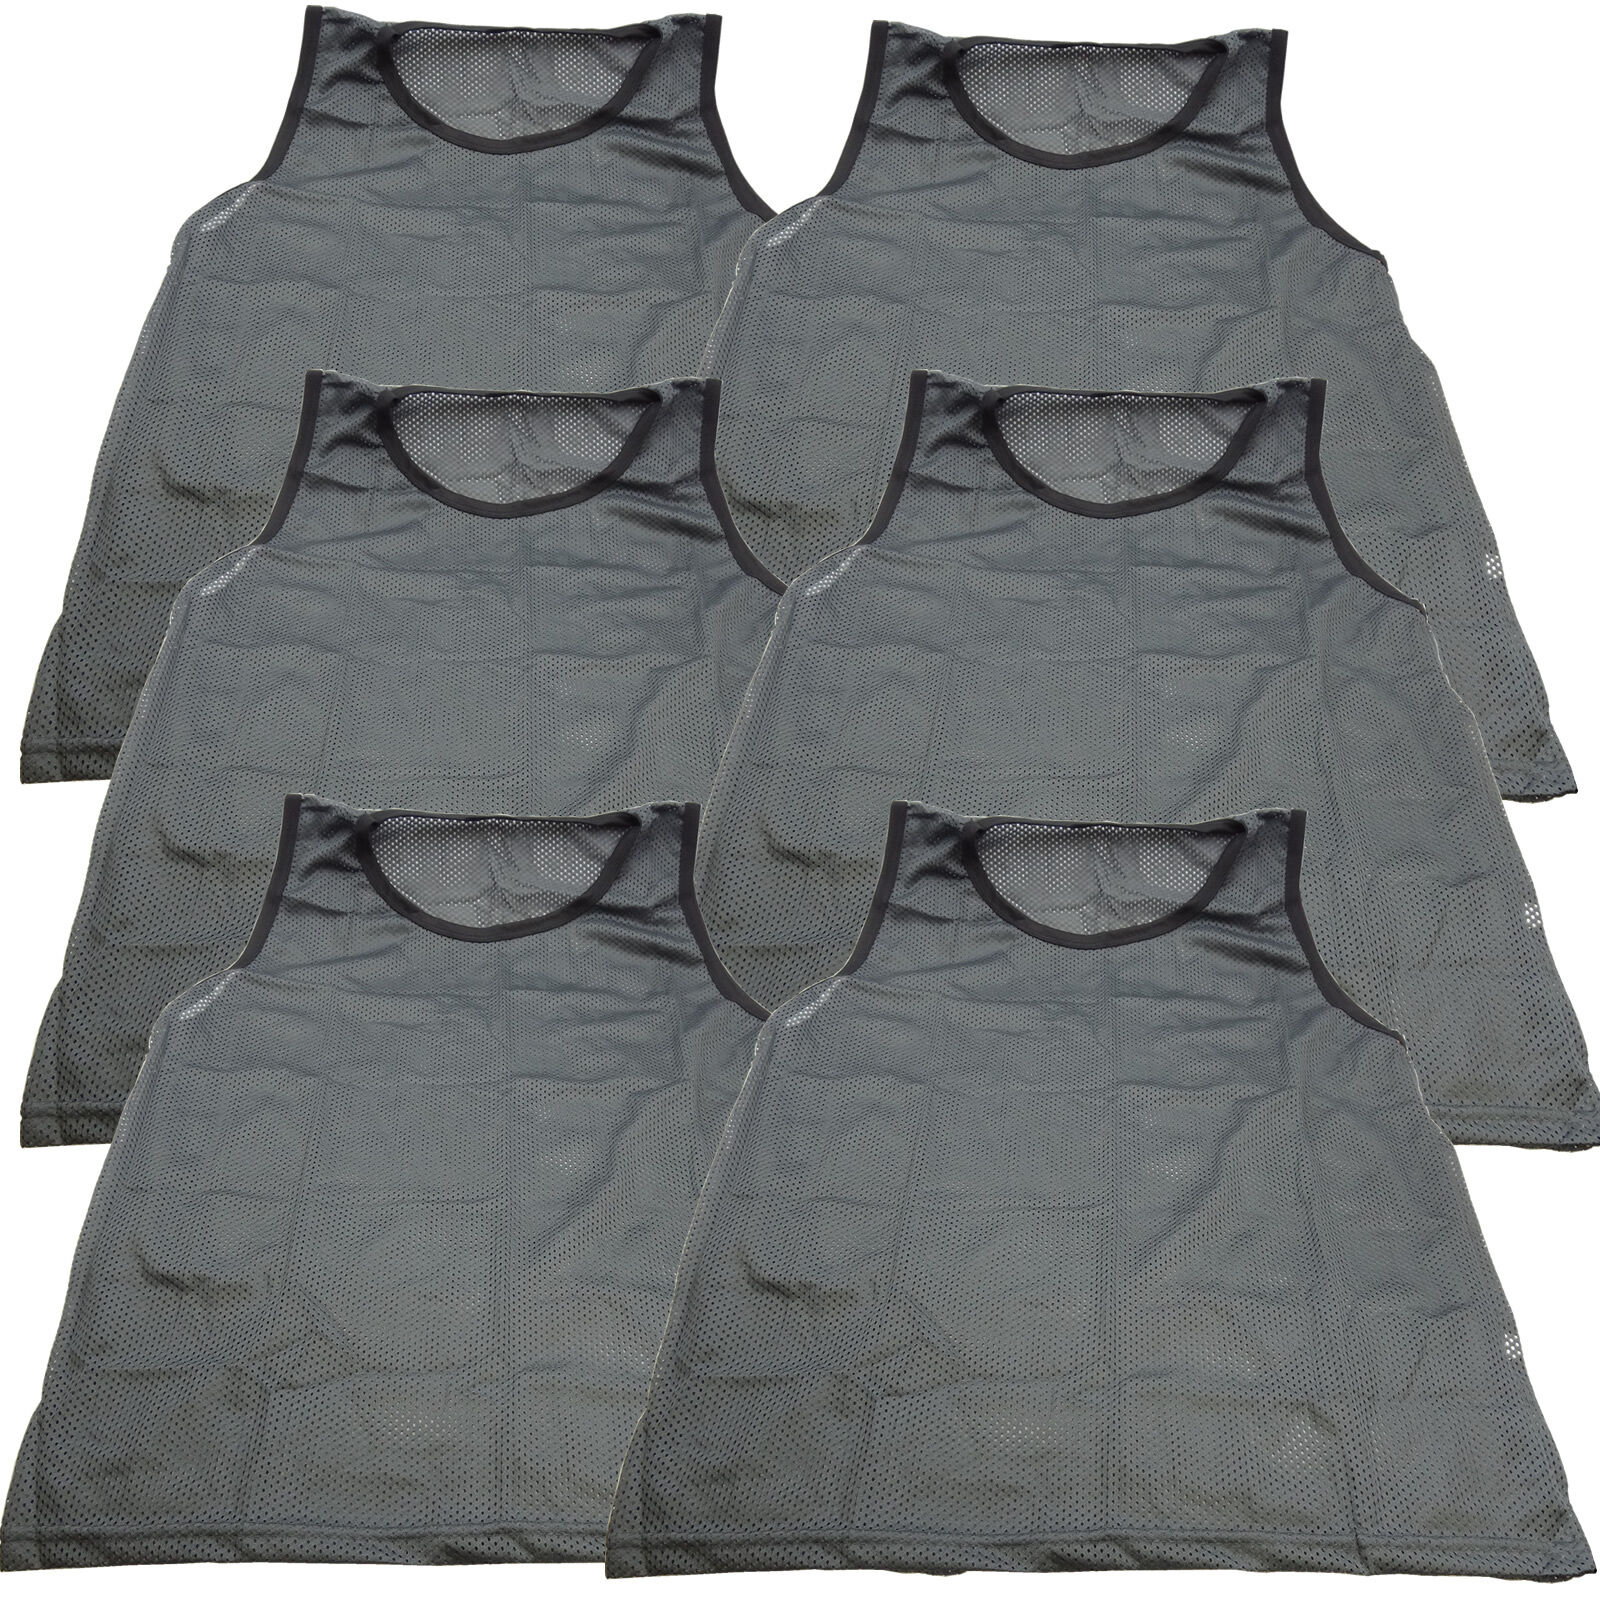 Great Choice Products Set Of 6 Scrimmage Vests Pinnies Soccer Gray Grey Adult New!